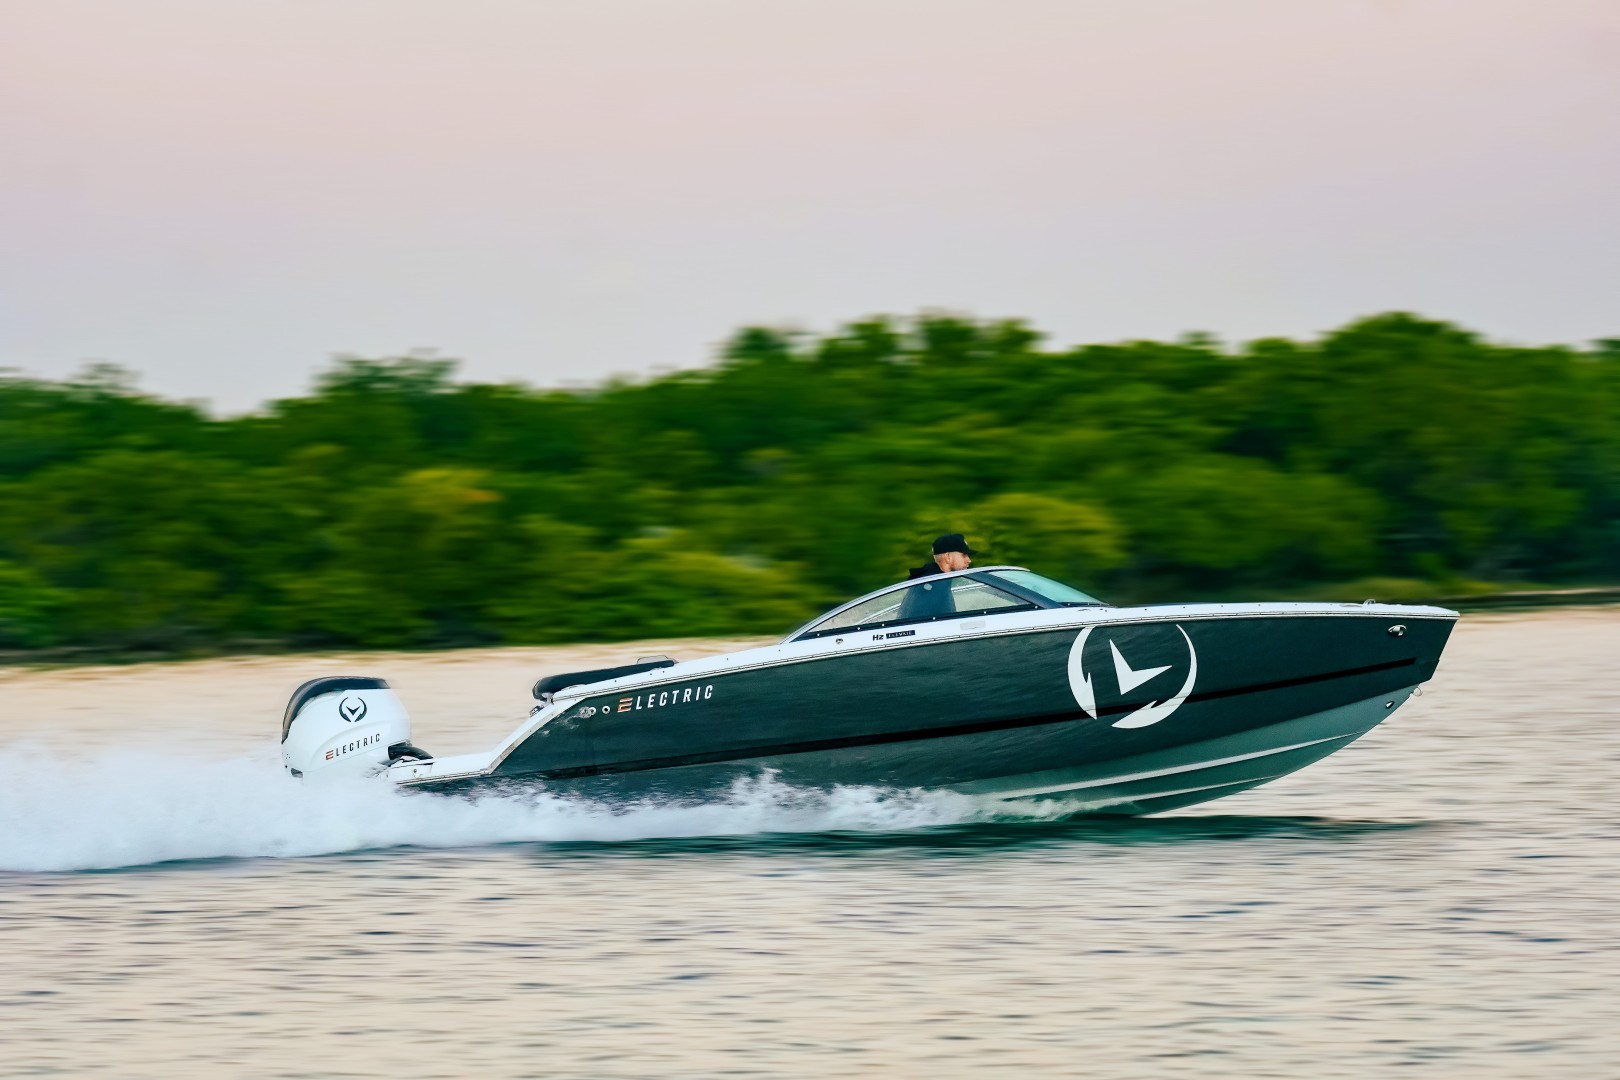 The brand new H2e, the finer side of Electric Boating